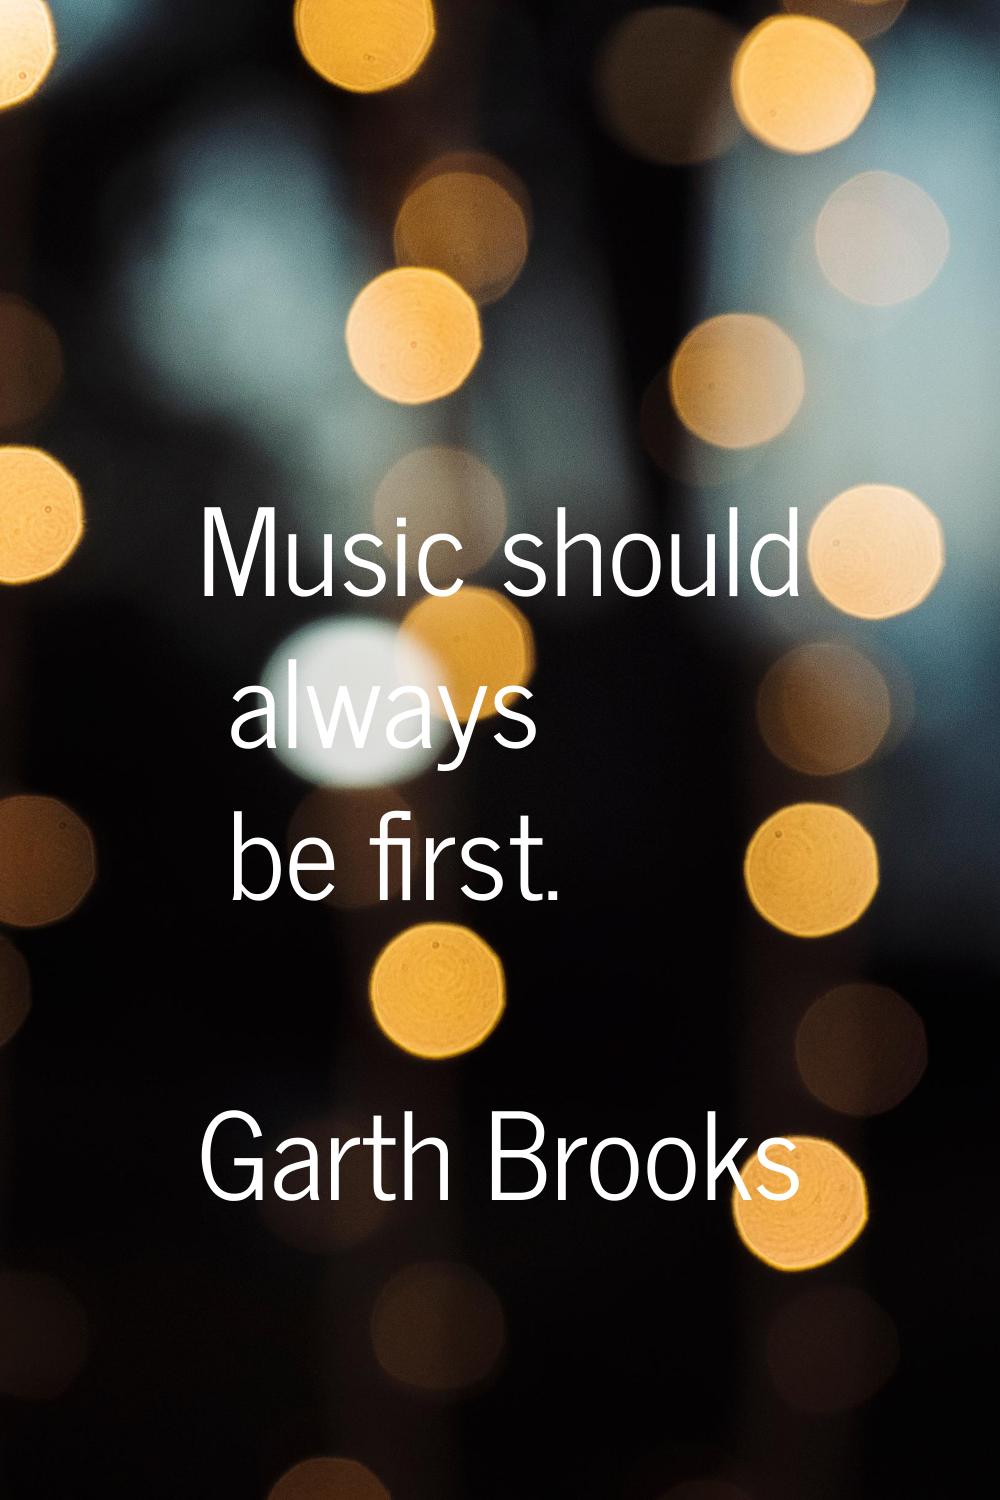 Music should always be first.